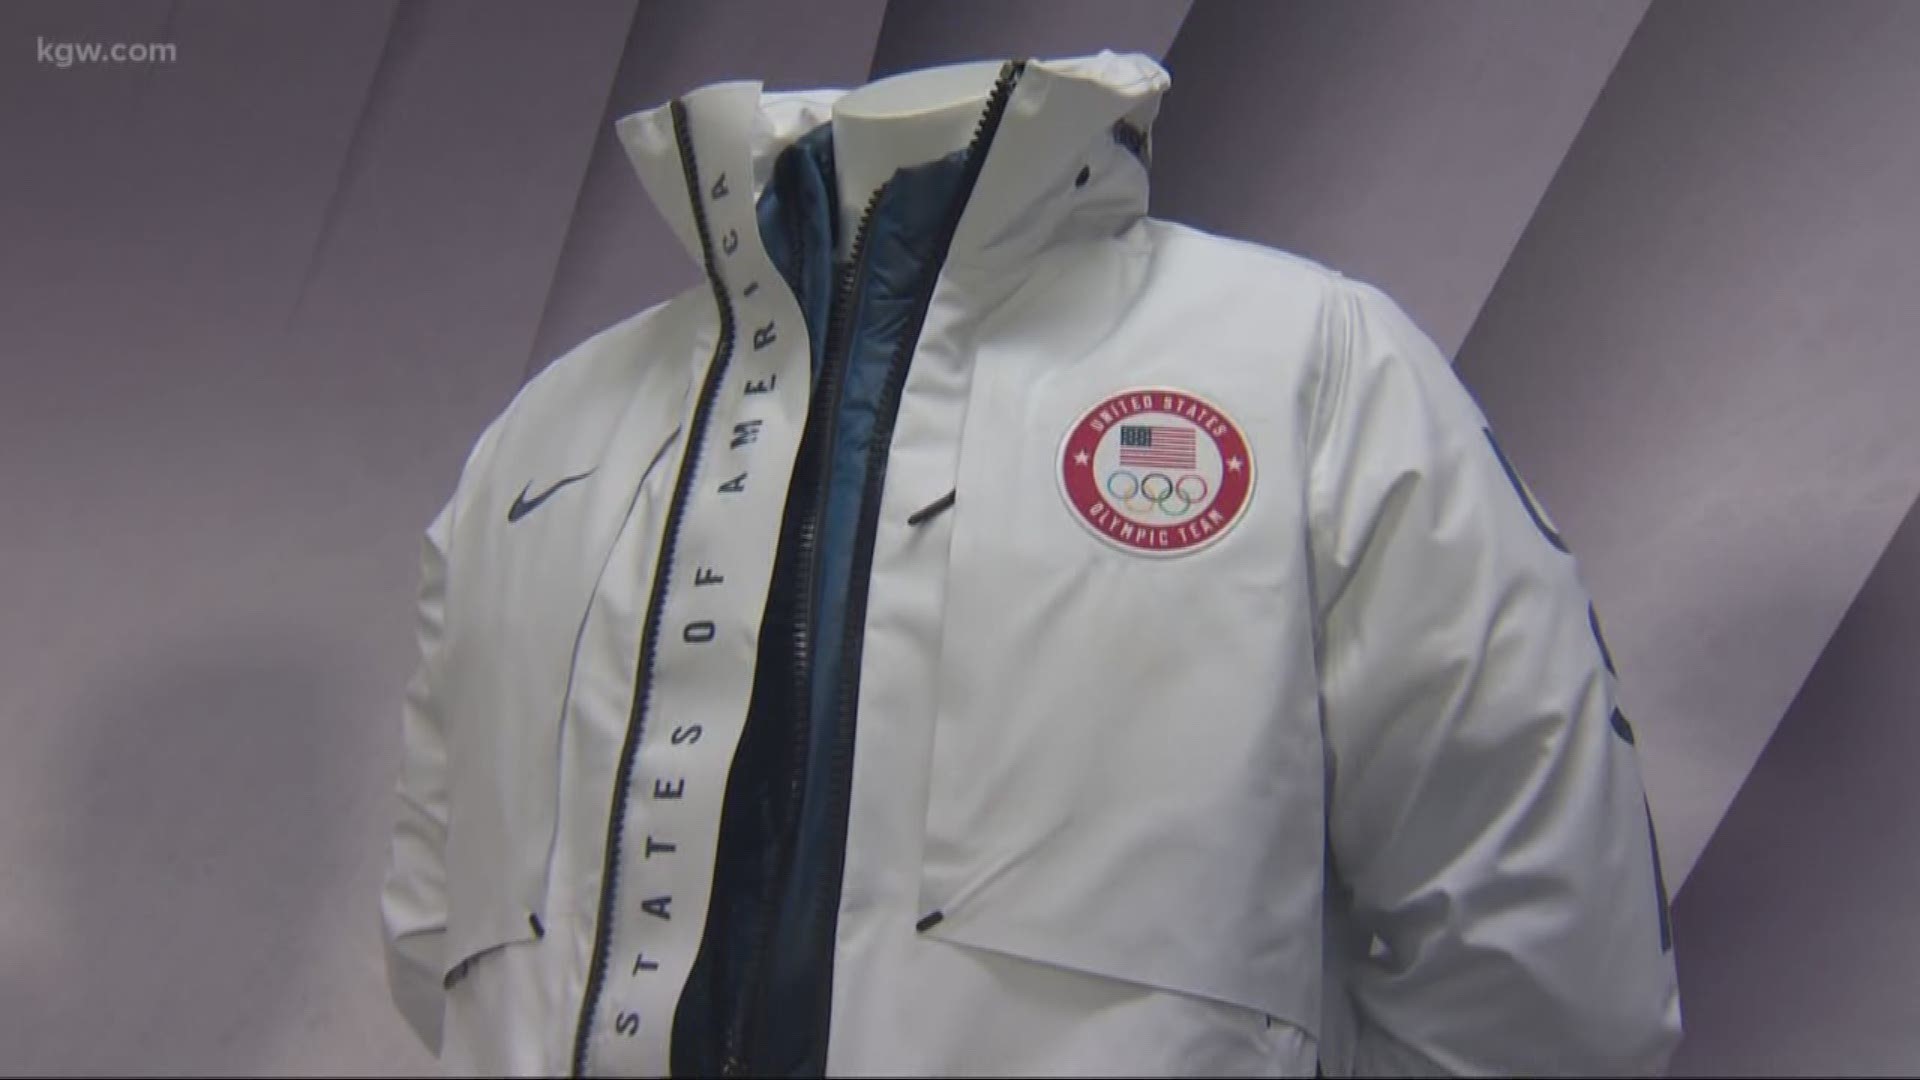 Nike's new outfits for Team USA at the Olympics